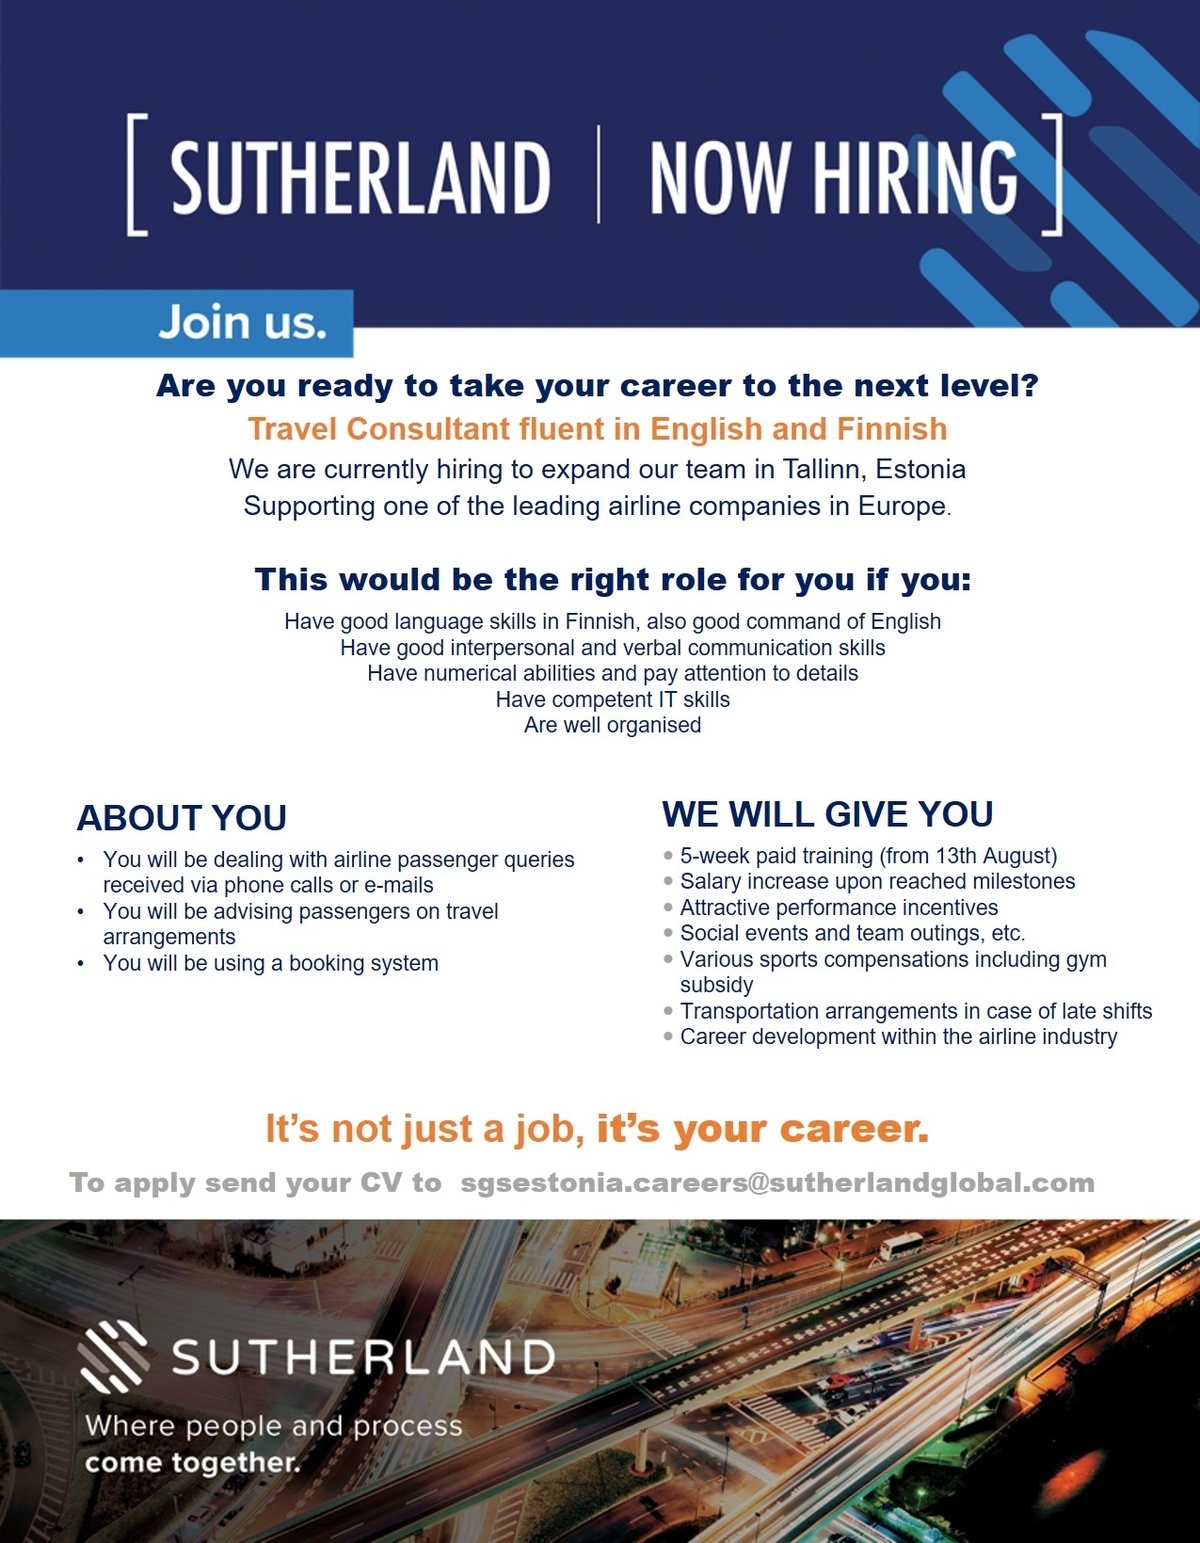 Sutherland Global Services OÜ Consultant for travels fluent in Finnish! Make your career move!